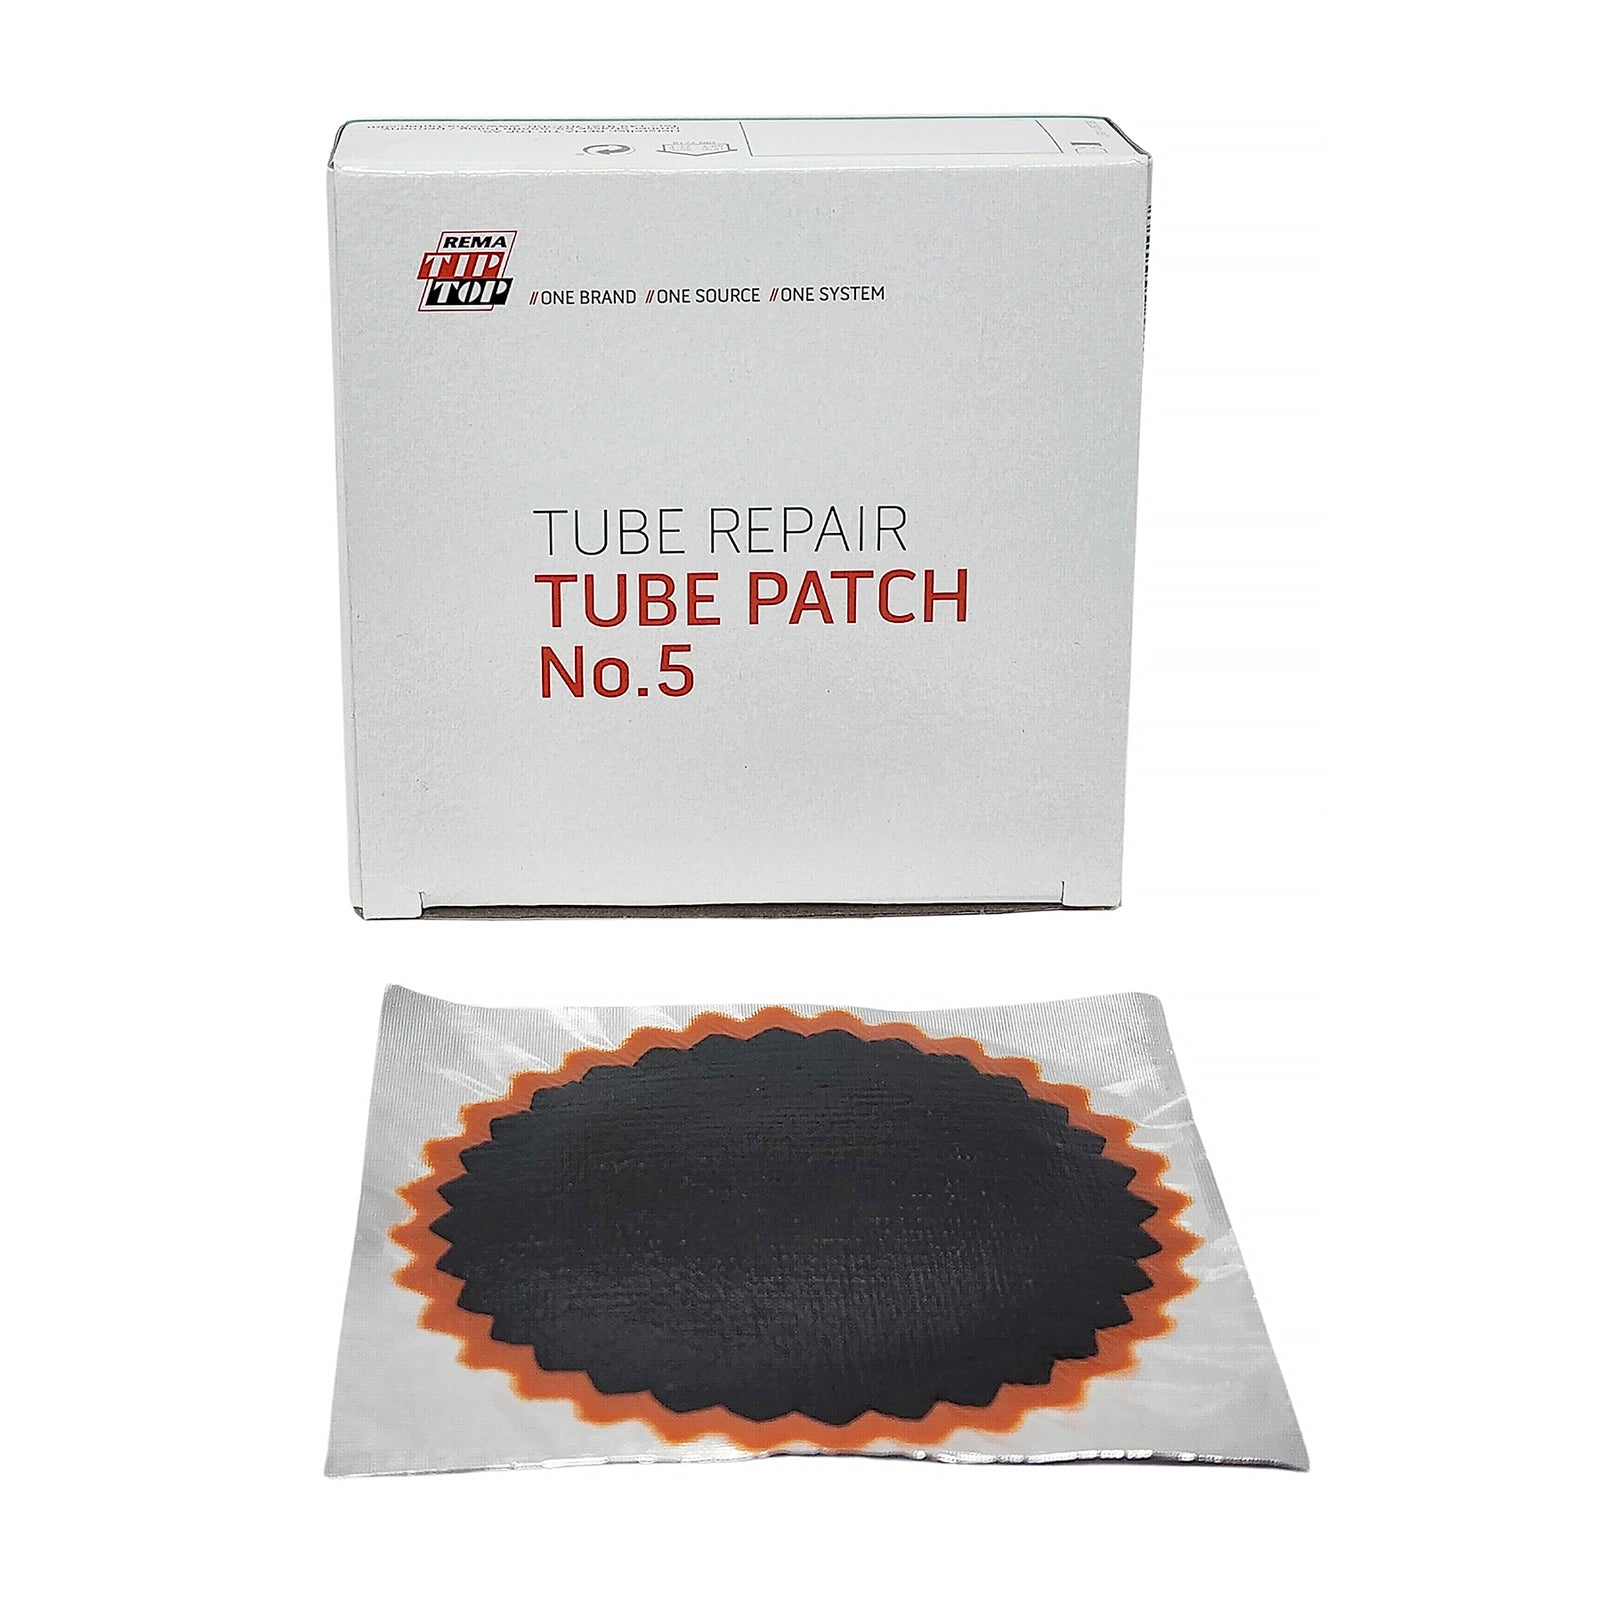 Rema 5 Tube Patch, 3-3/4" Round, Red Edge (10 bx)